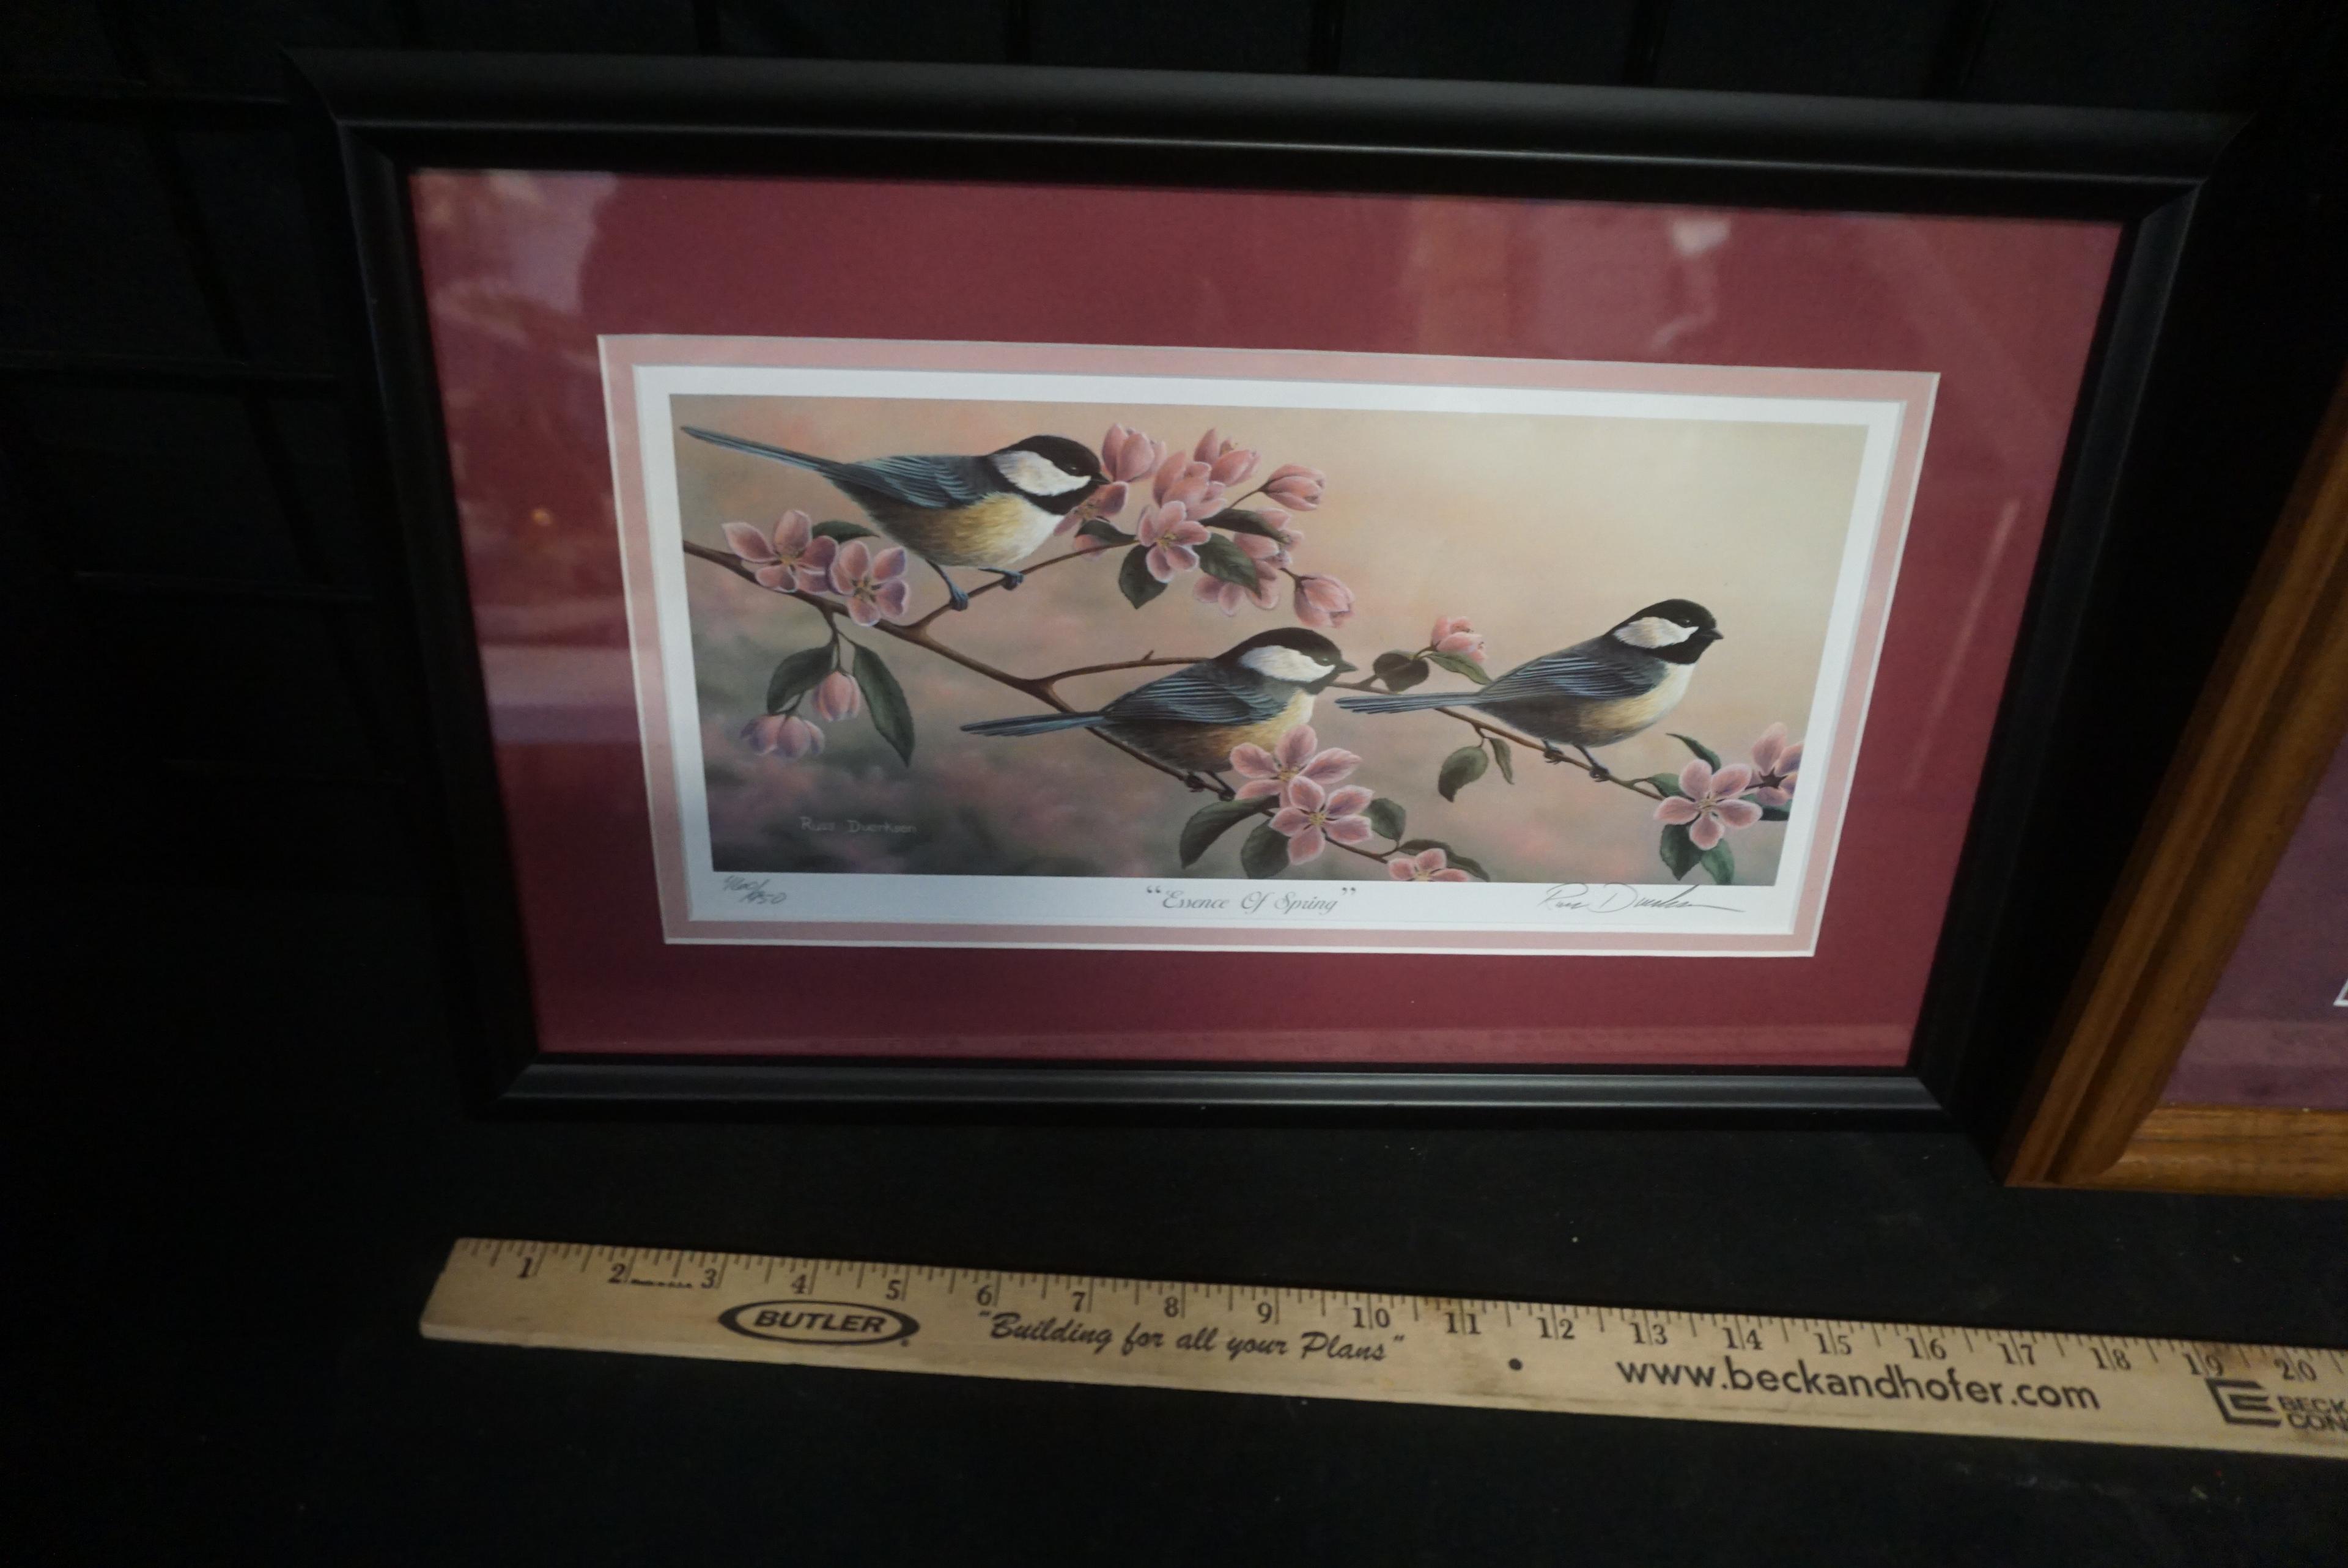 Signed Russ Duerksen Pictures - "Country Charm" 1/25 C.E. & "Essence Of Spring" 460/950